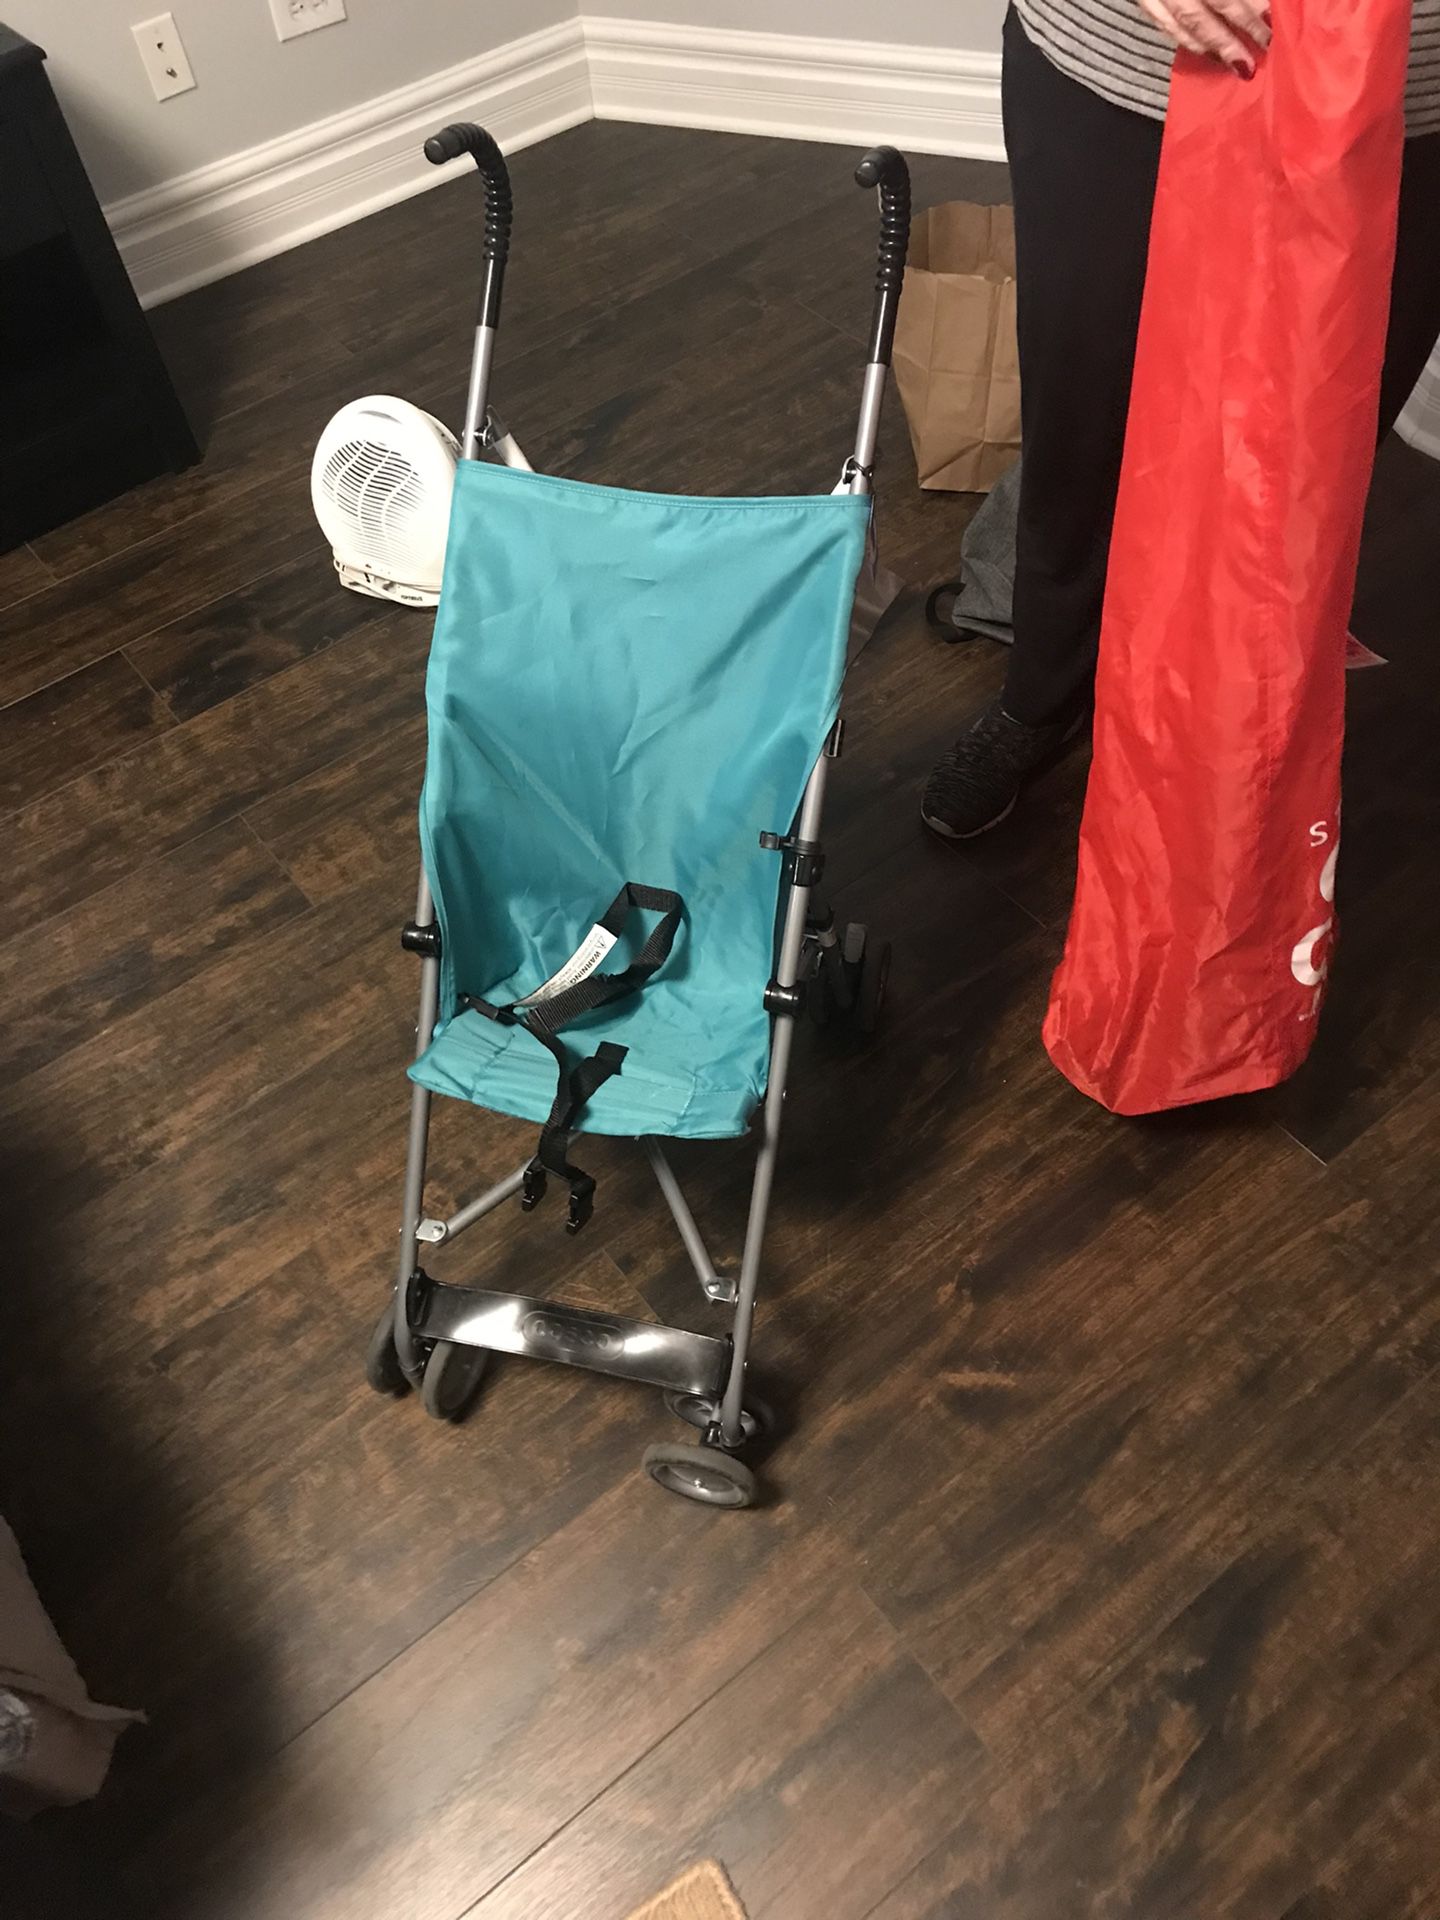 Kids Stroller And Gate Check In Bag